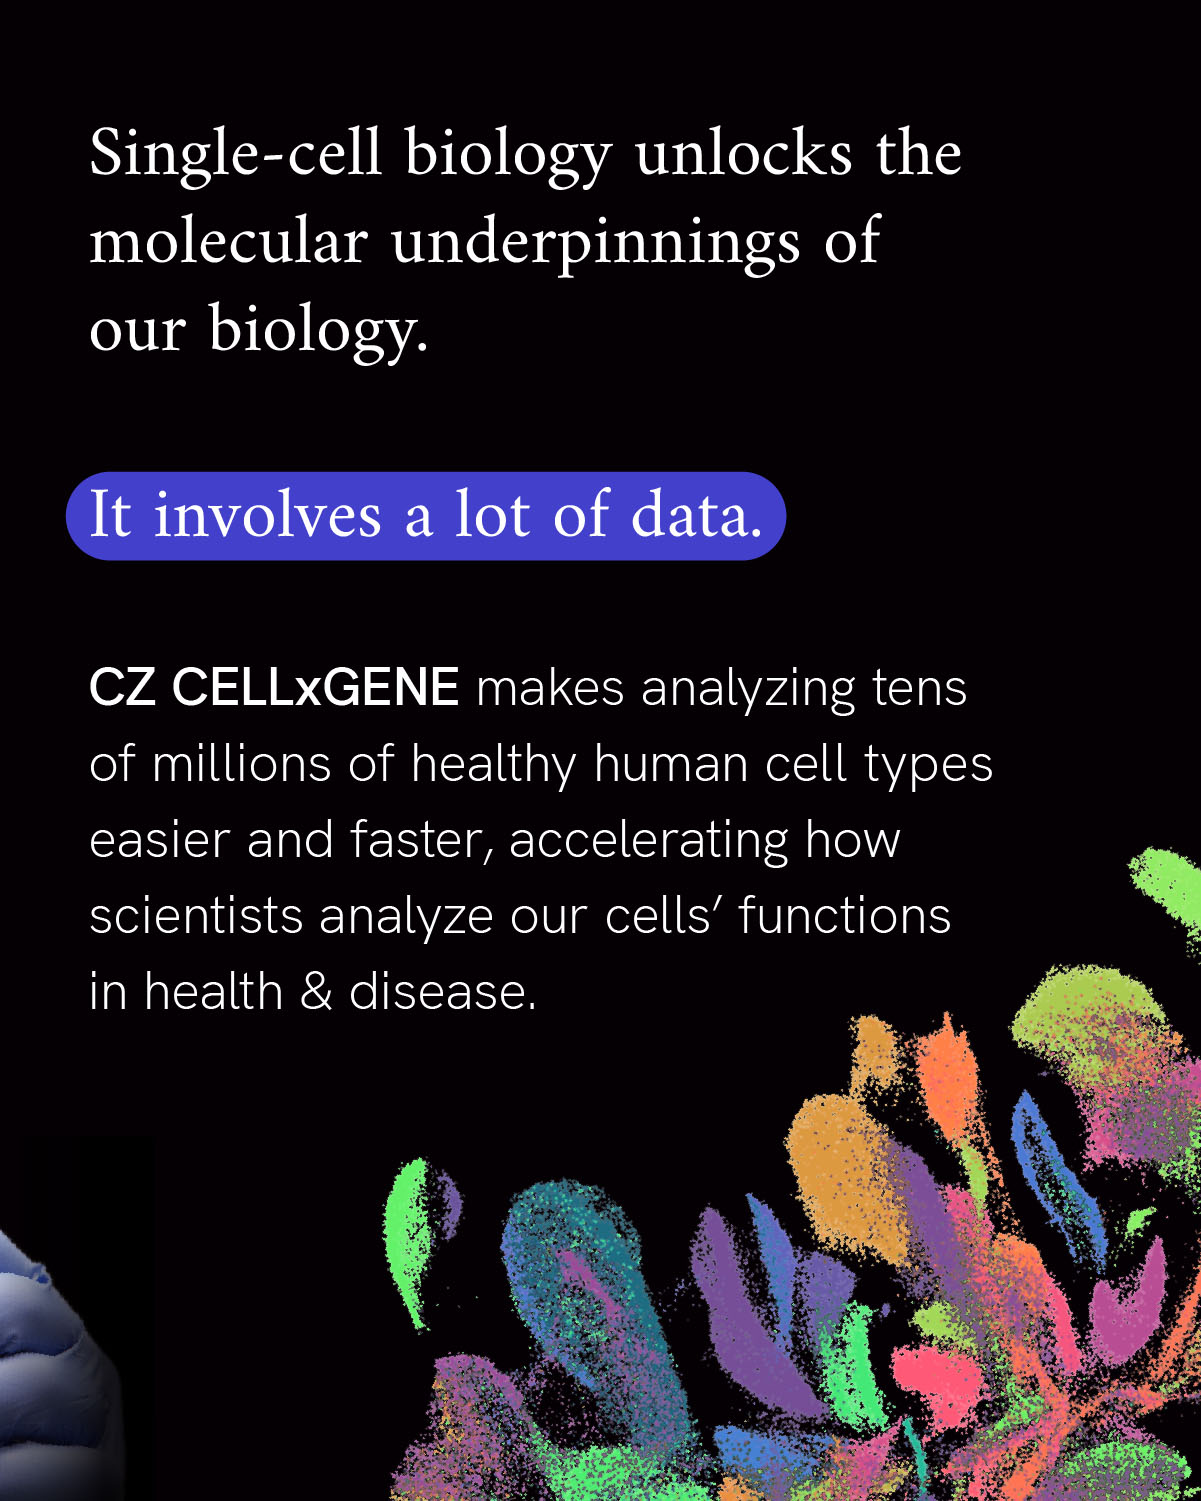 Infographic reads “Single-cell biology unlocks the molecular underpinnings of our biology. It involves a lot of data. CZ CELLxGENE makes analyzing tens of millions of healthy human cell types easier and faster, accelerating how scientists analyze our cells’ functions in health & disease.” A multi-tissue visualization with different colors corresponding to various cell types accompanies the text.